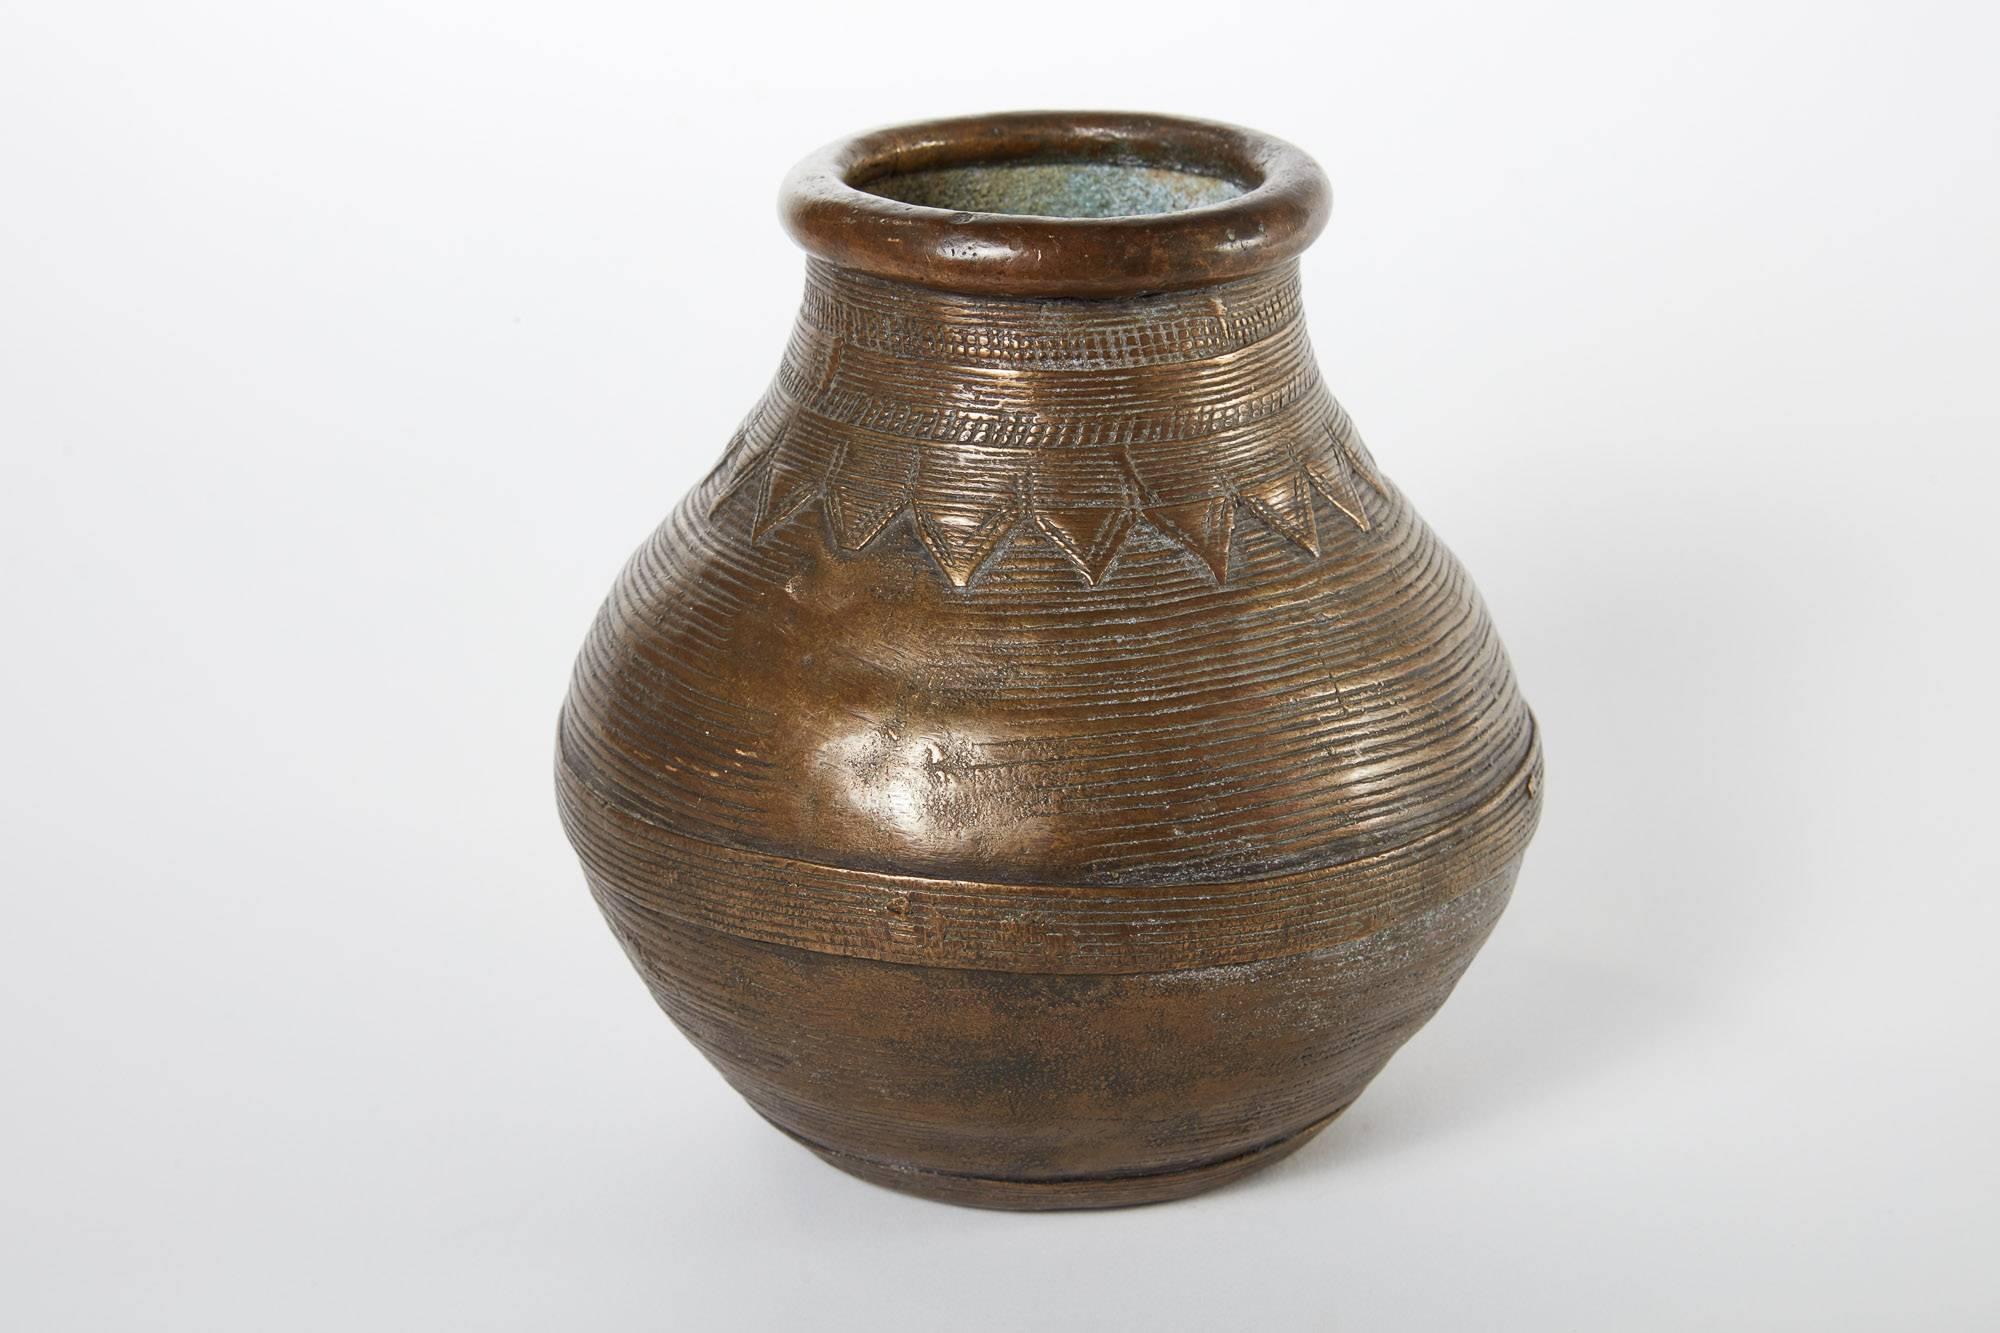 19th Century Bronze Vessel From Nepal 
This detailed piece was found in Nepal and includes a small ring on one side